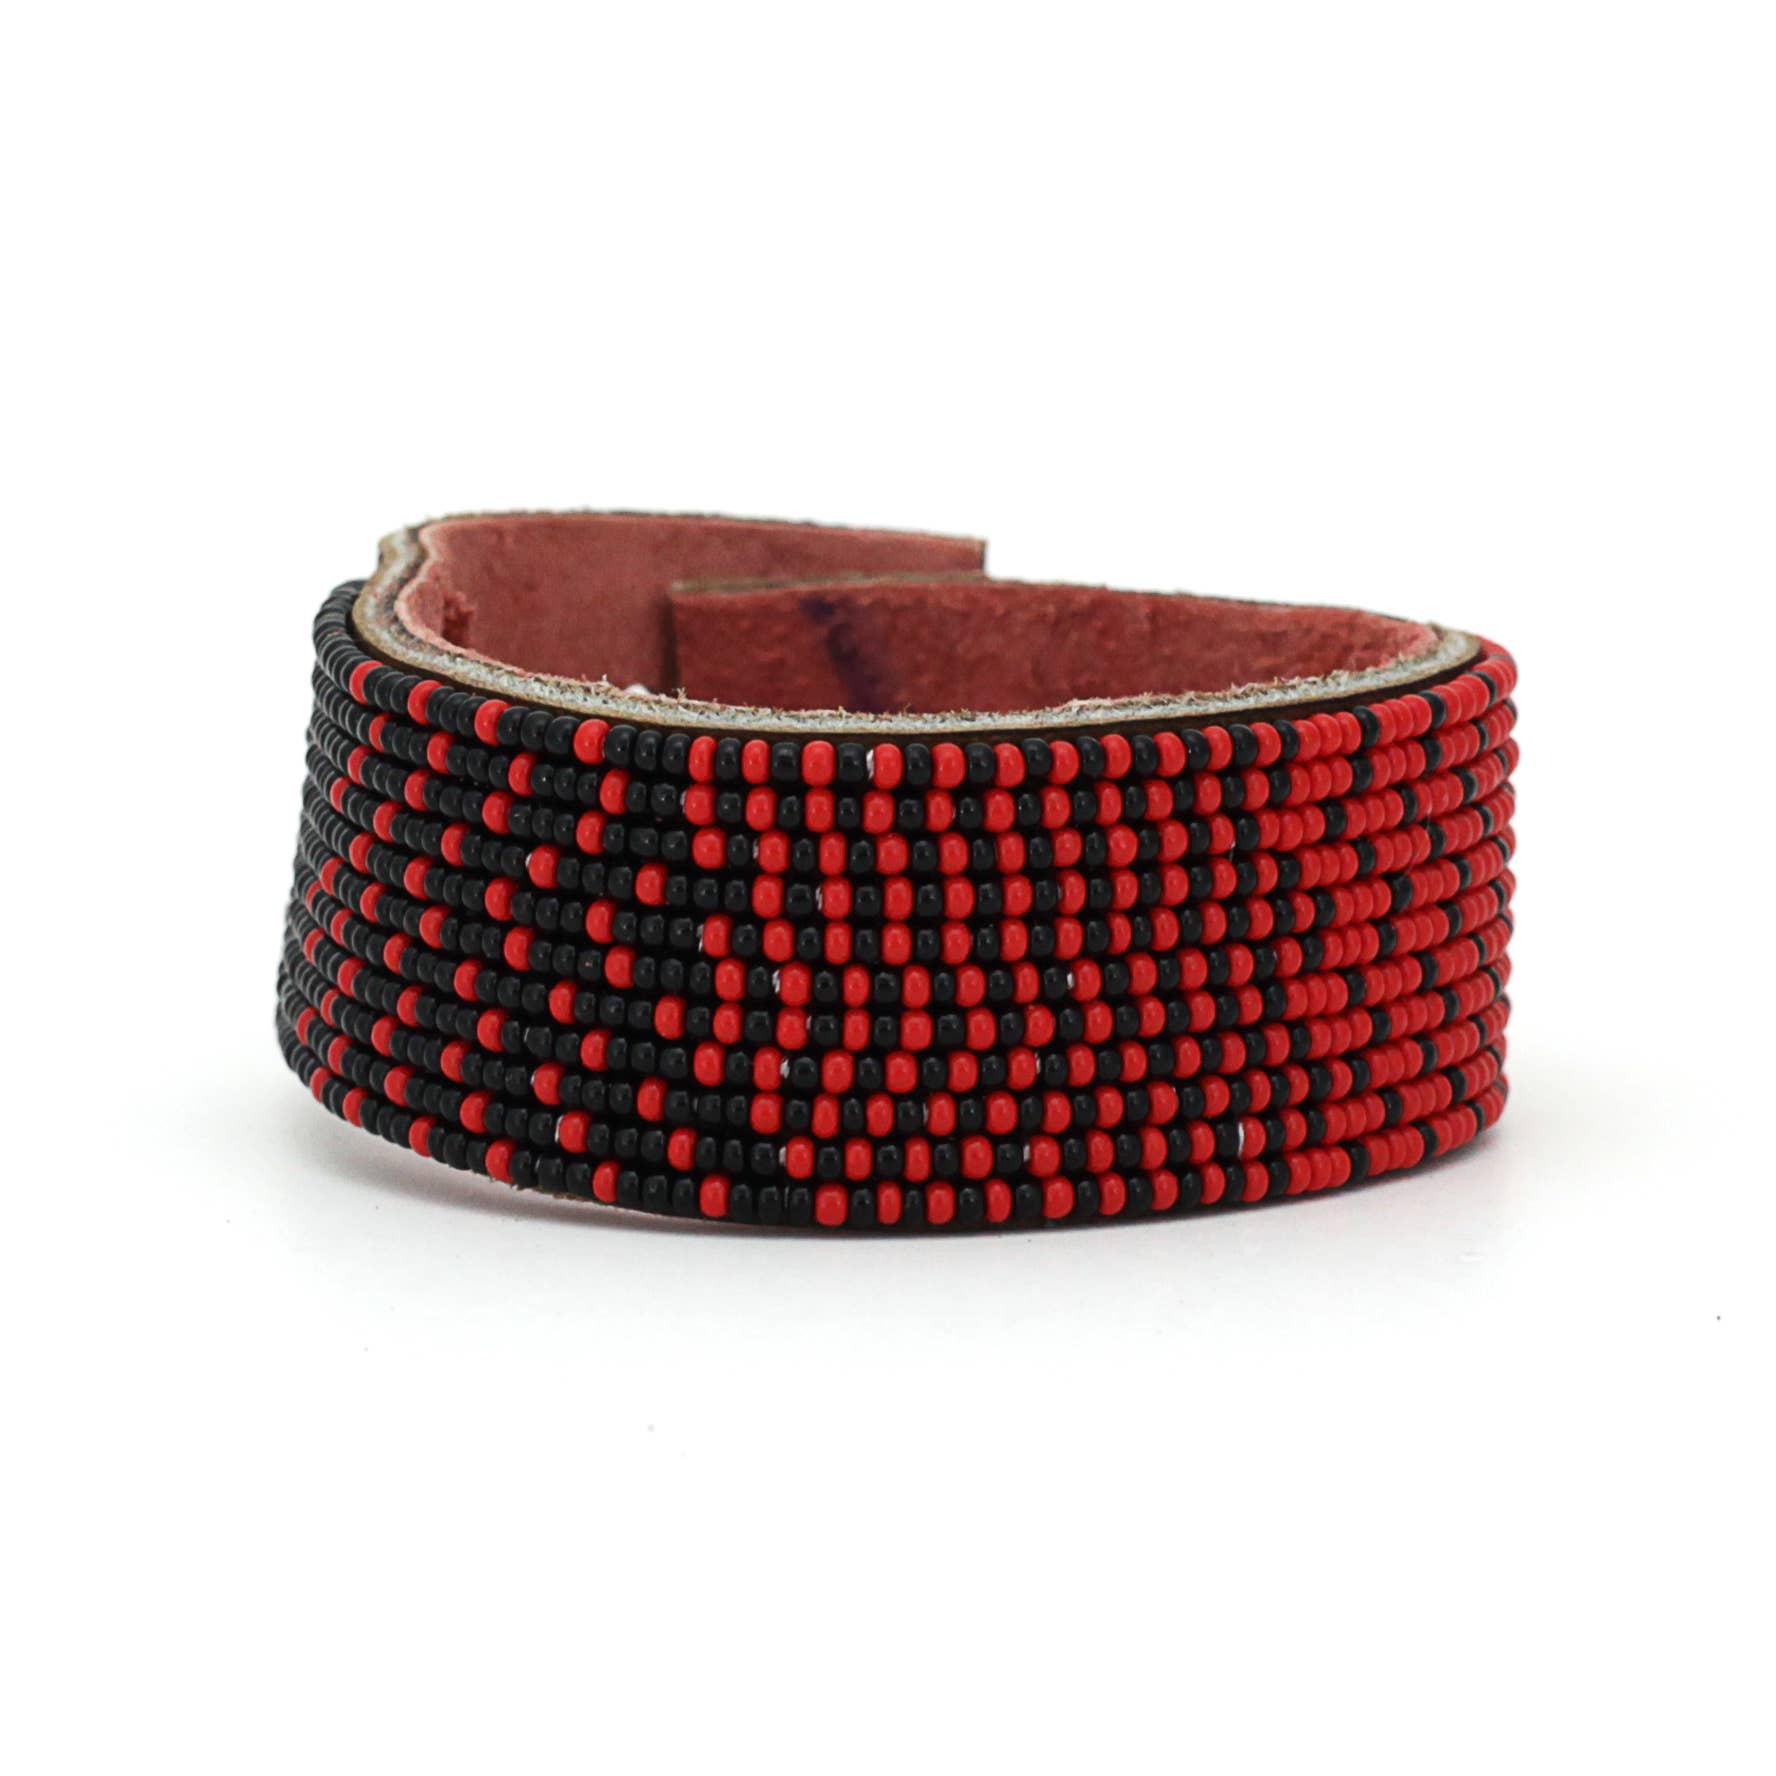 Medium Red and Black Ombre Leather Cuff - Spiral Circle